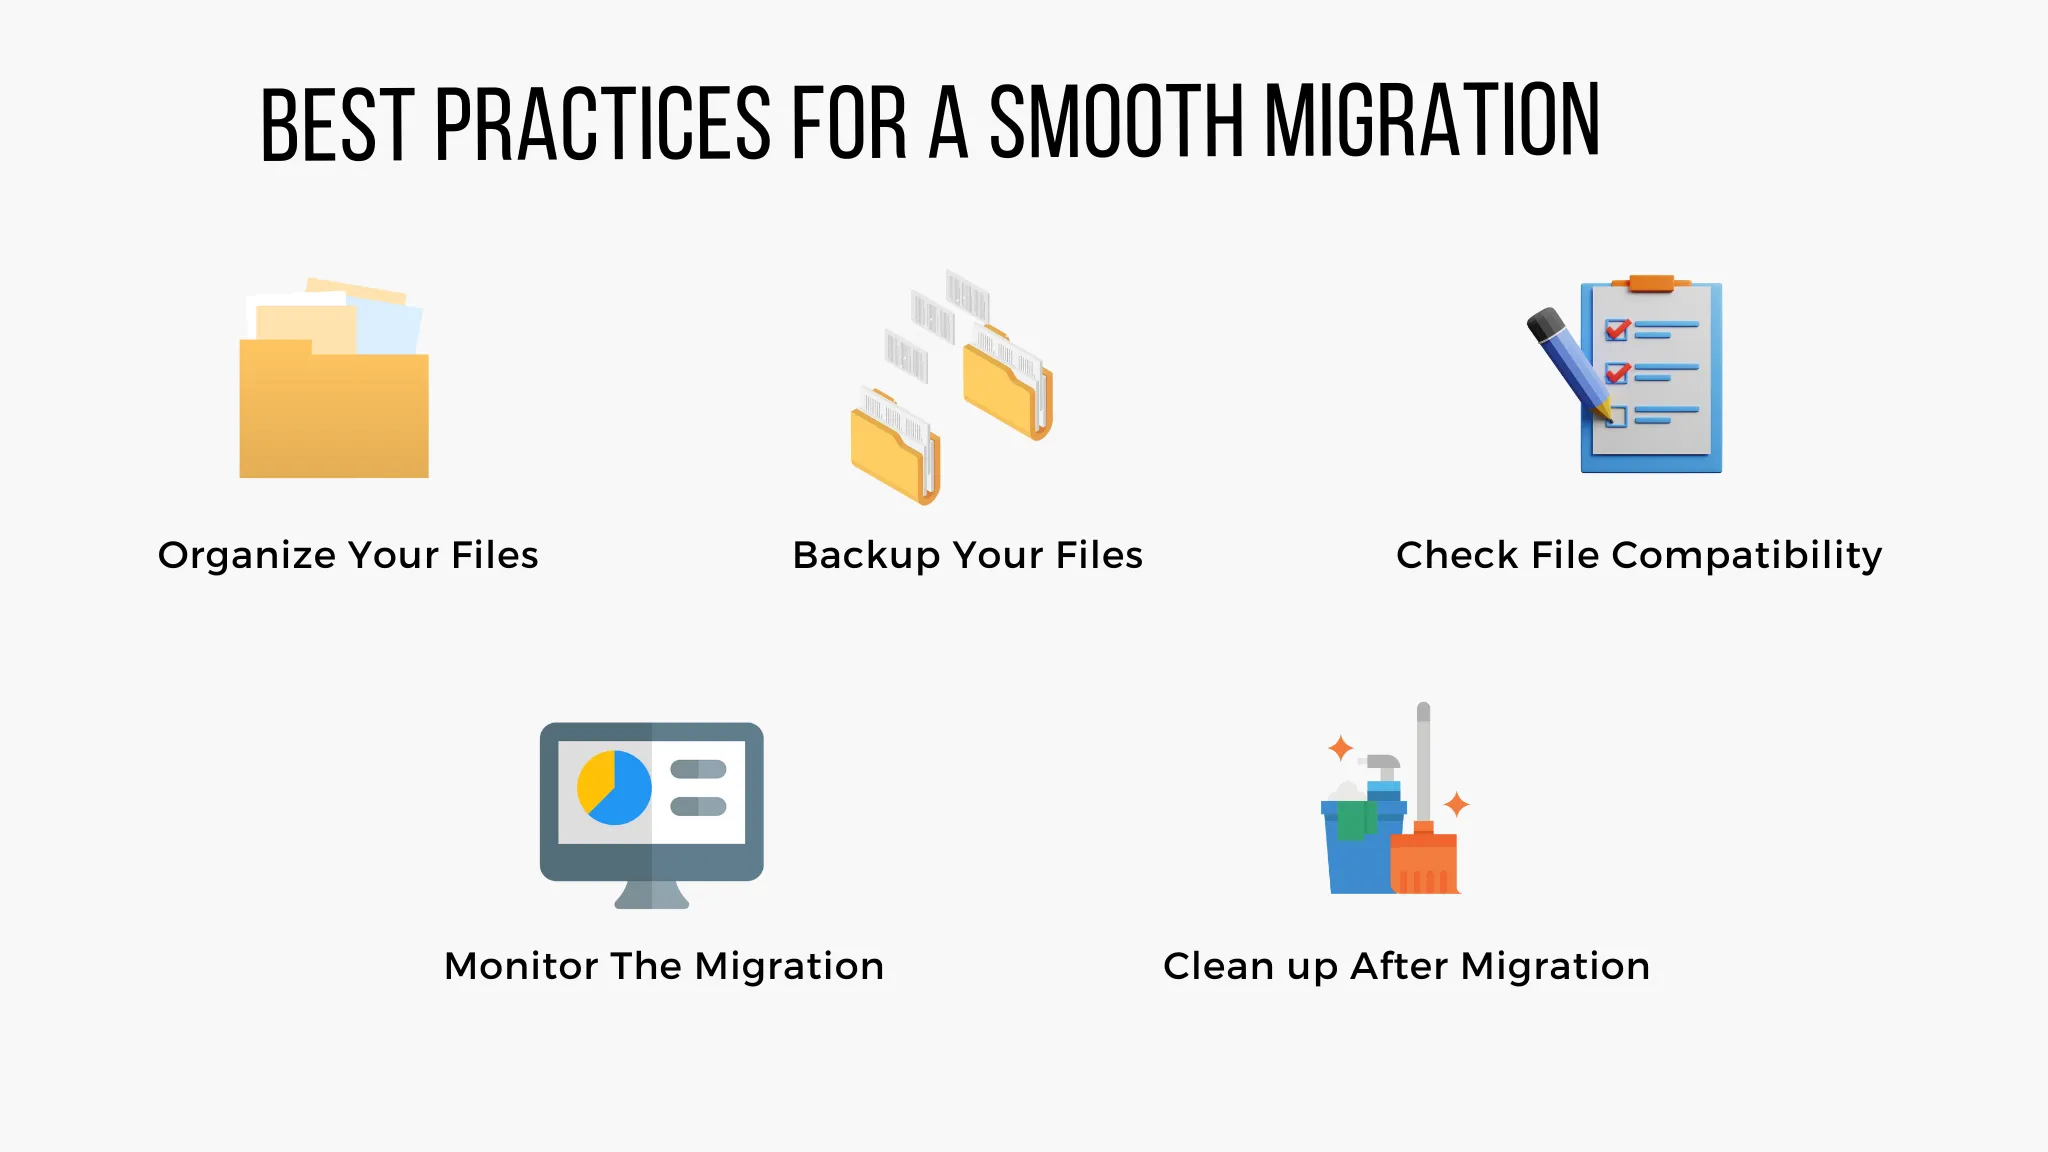 Tips and Best Practices for a Smooth Migration